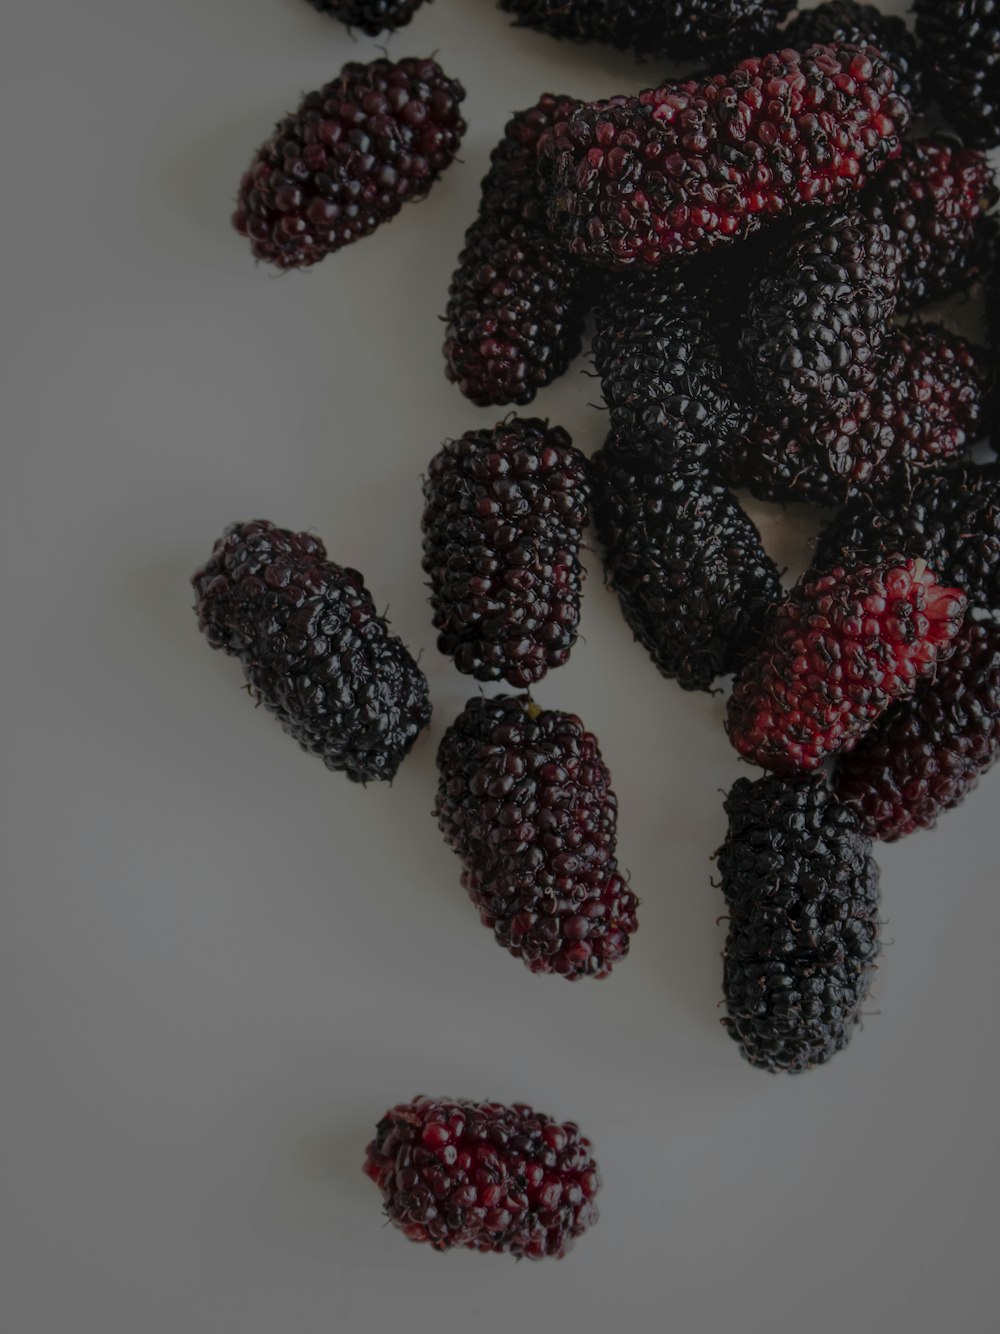 a pile of blackberries on a white surface